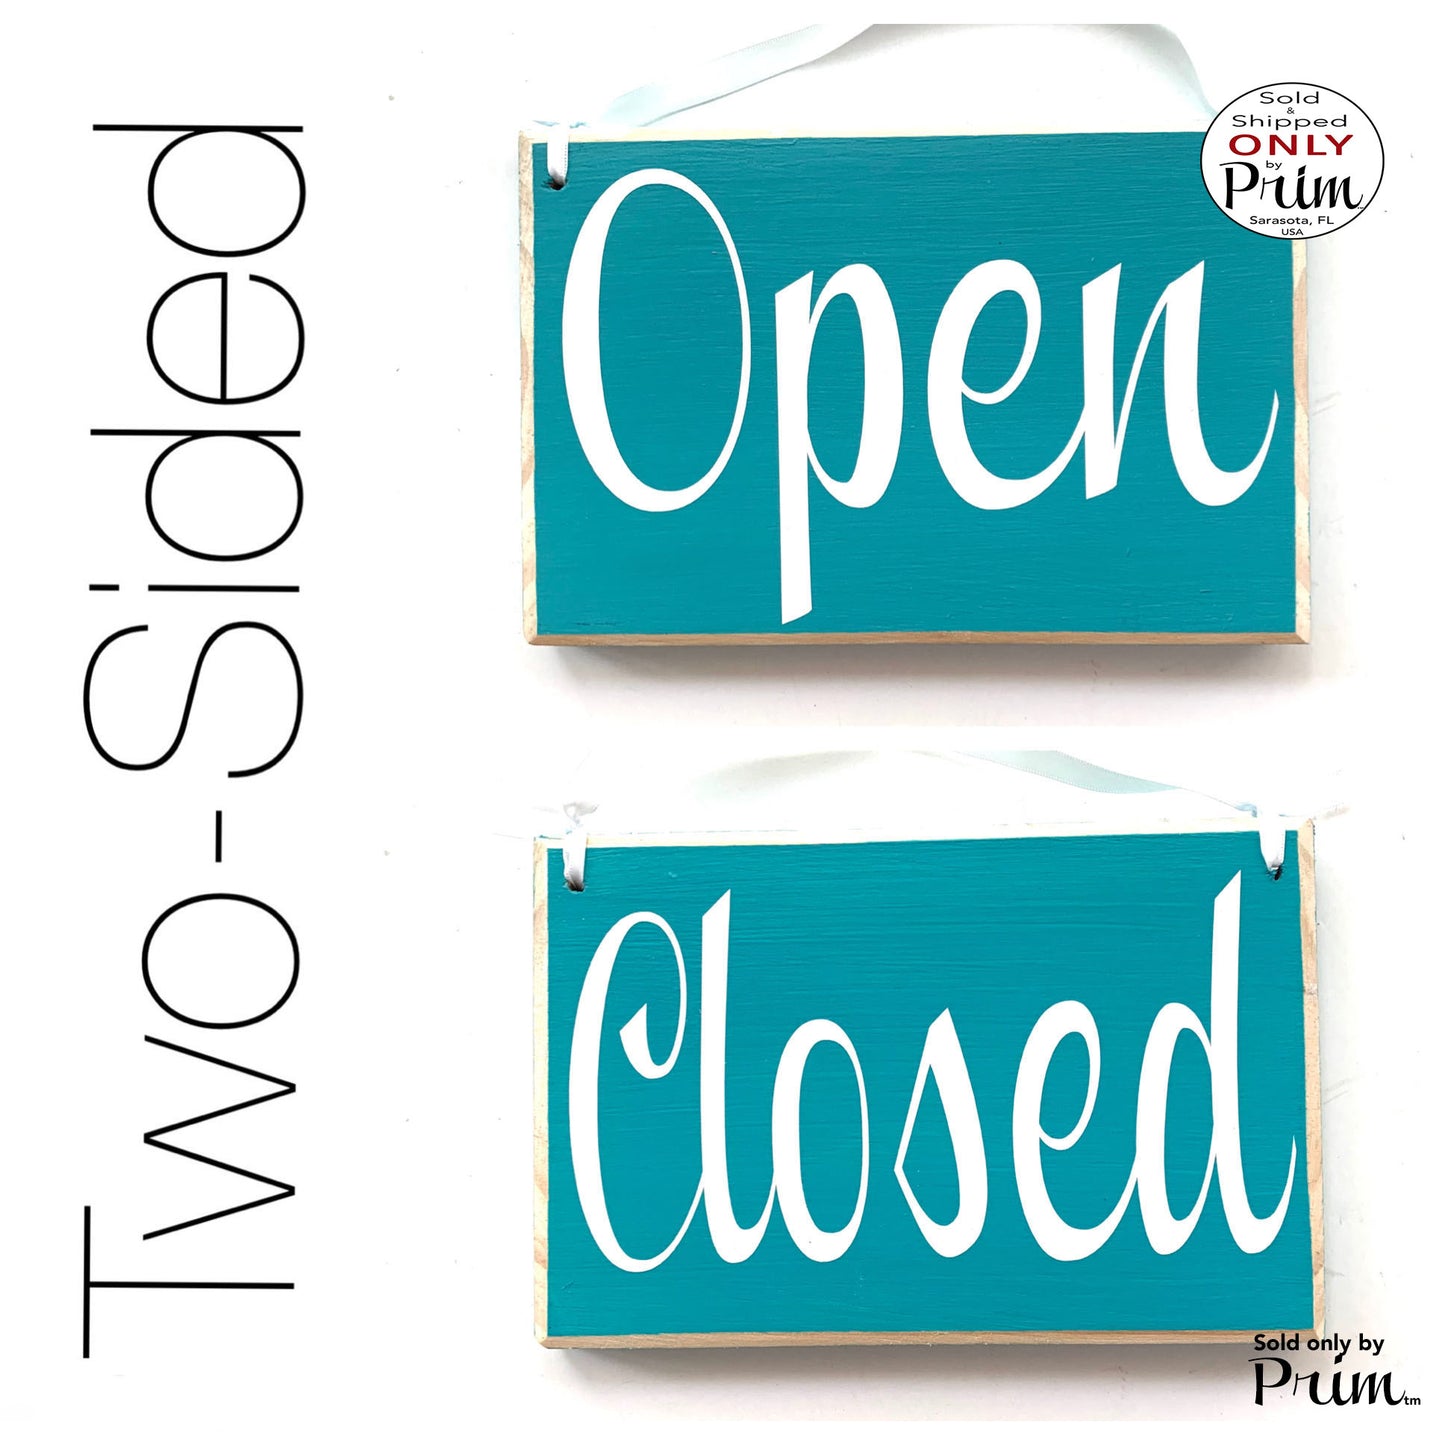 8x6 OPEN CLOSED Custom Wood Sign Office Store Hours Business Salon Spa Welcome Come On In Wall Decor Hanger Door Plaque Designs by Prim